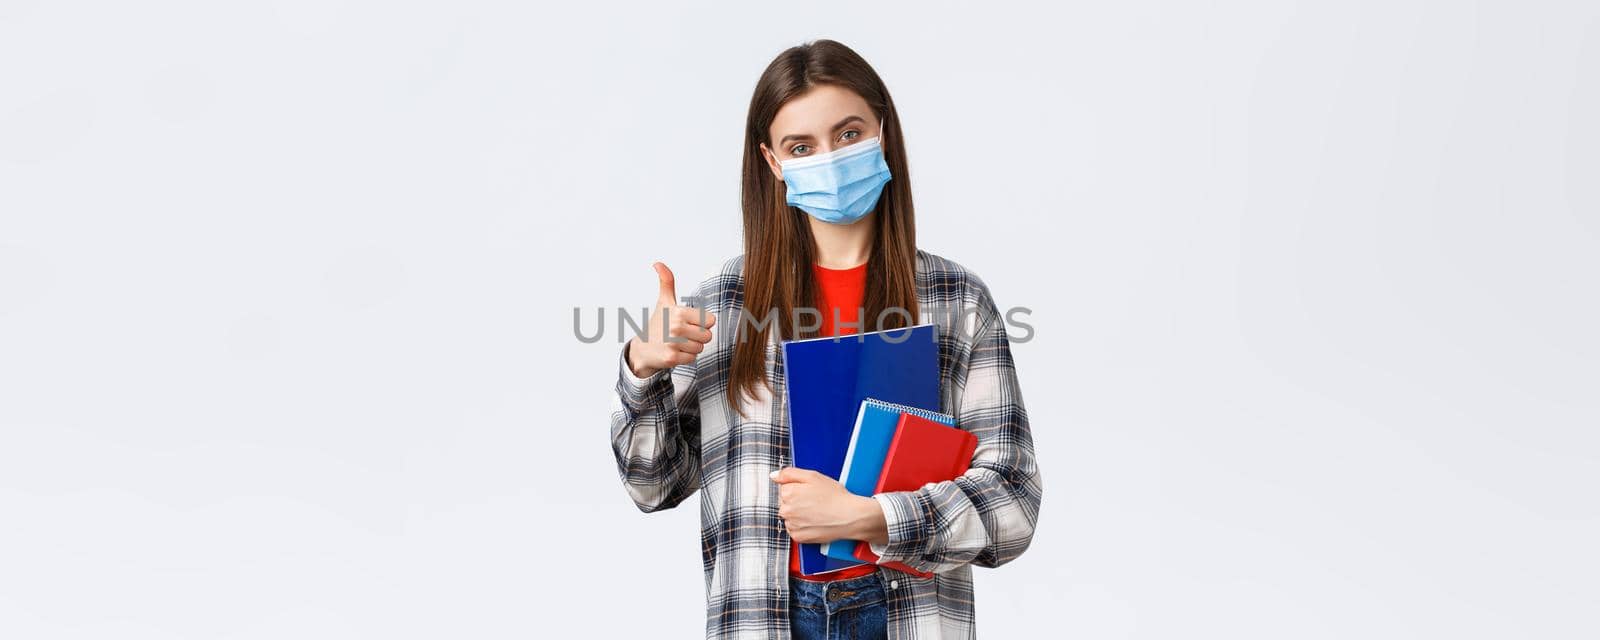 Coronavirus pandemic, covid-19 education, and back to school concept. Pleased young female freshman in college, showing thumb-up as studying prestige univeristy, carry notebooks.